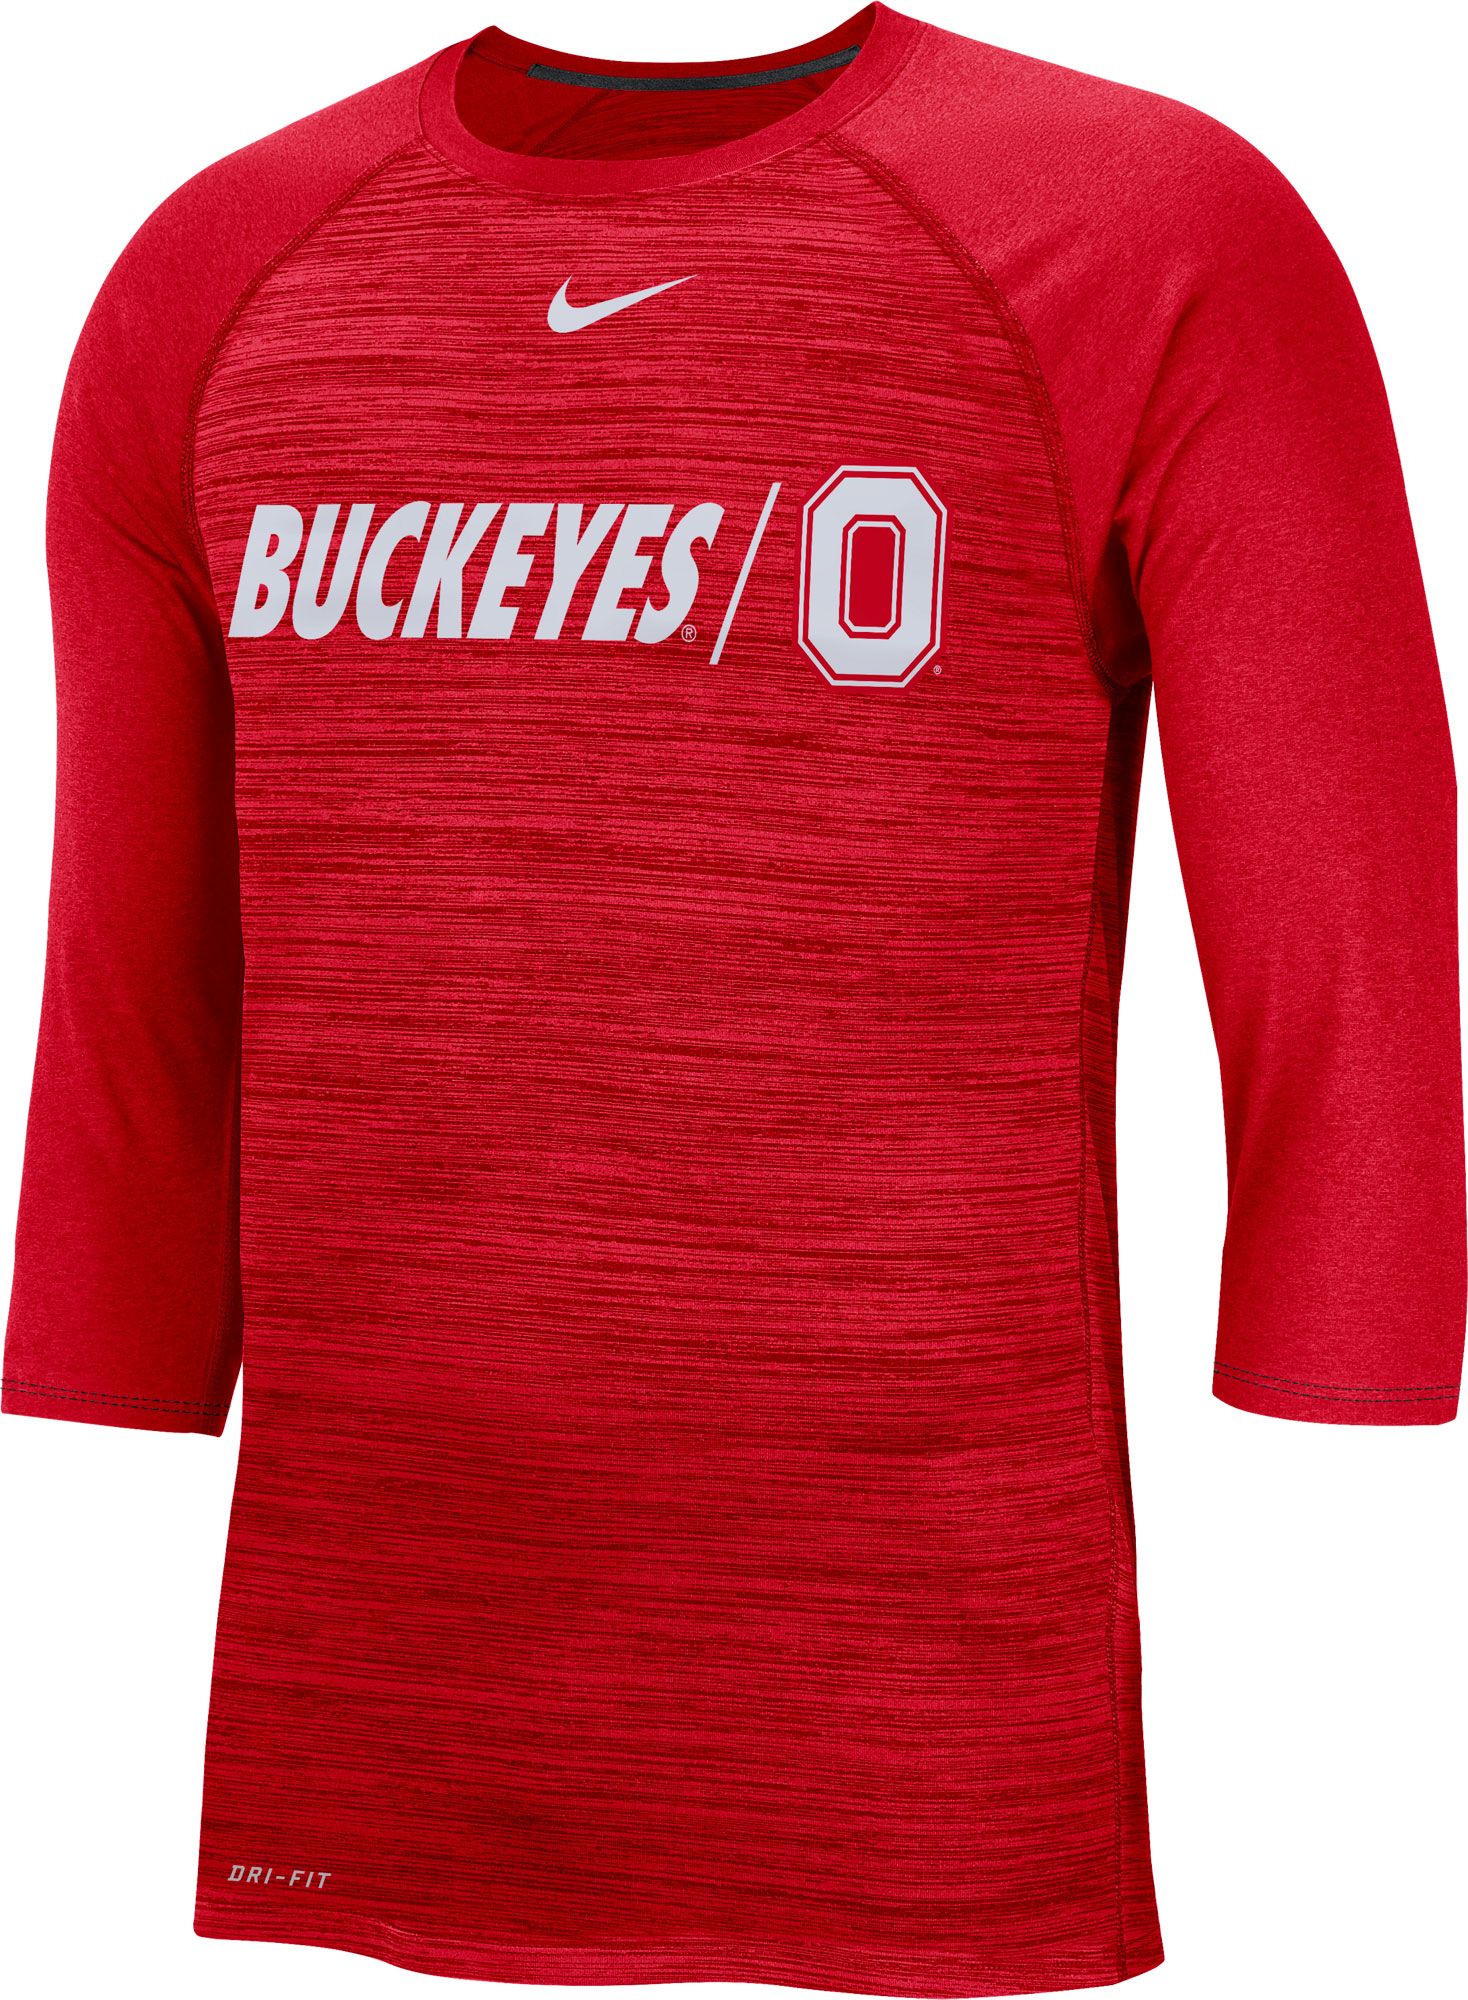 number 4 ohio state jersey